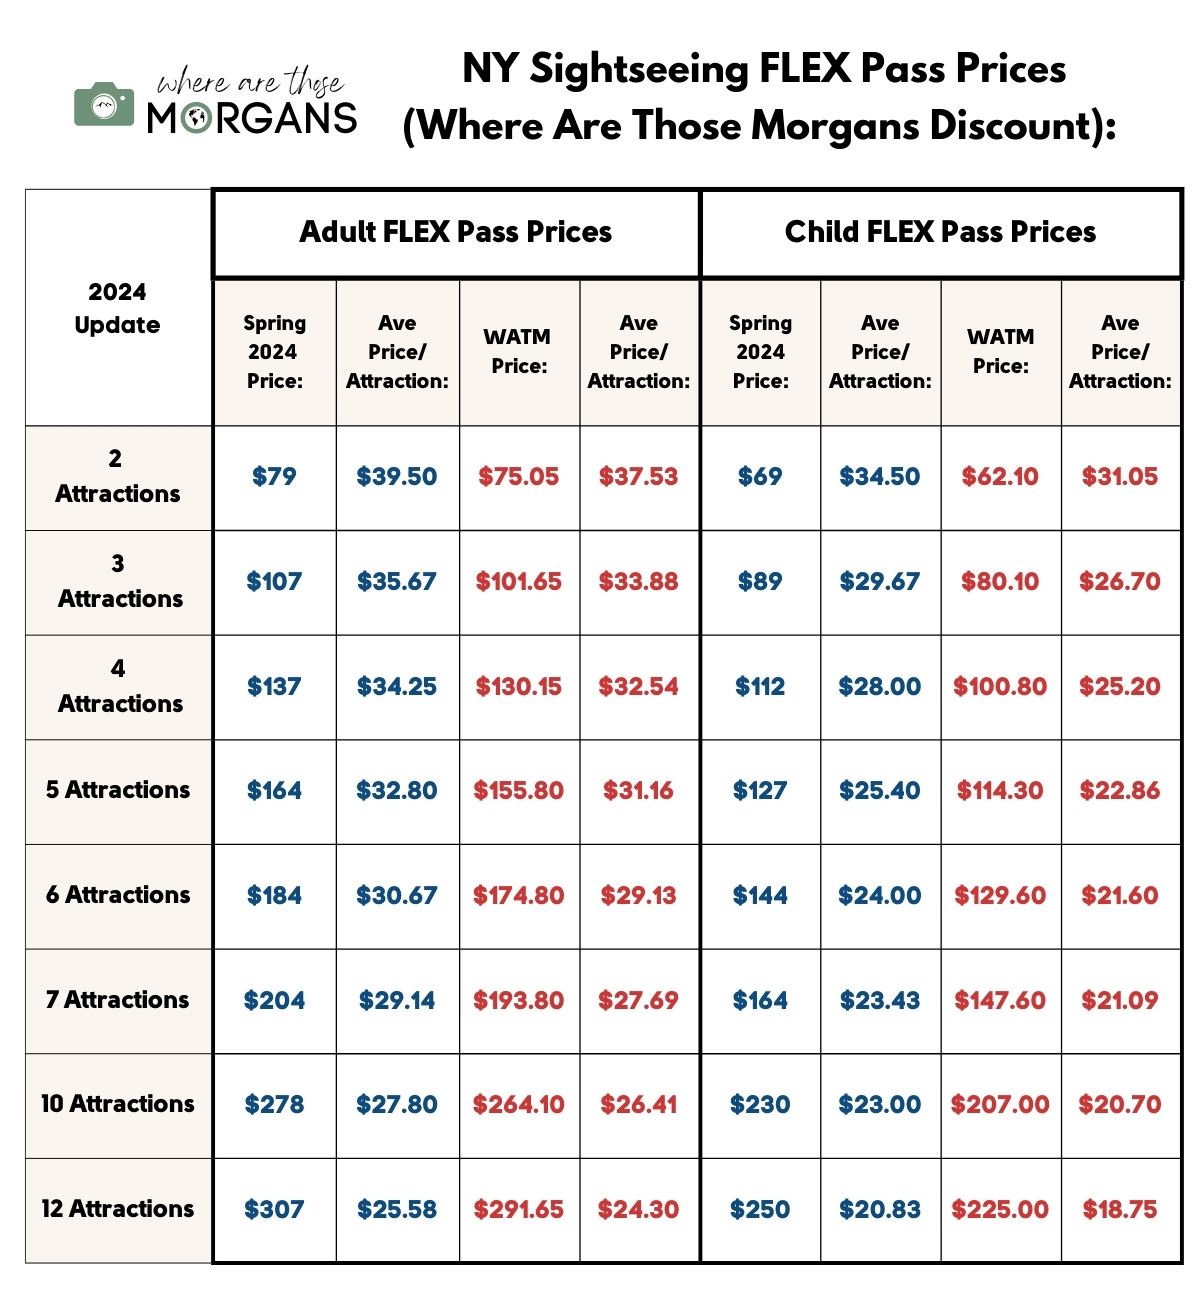 NY Sightseeing flex pass price comparison chart with Where Are Those Morgans discount